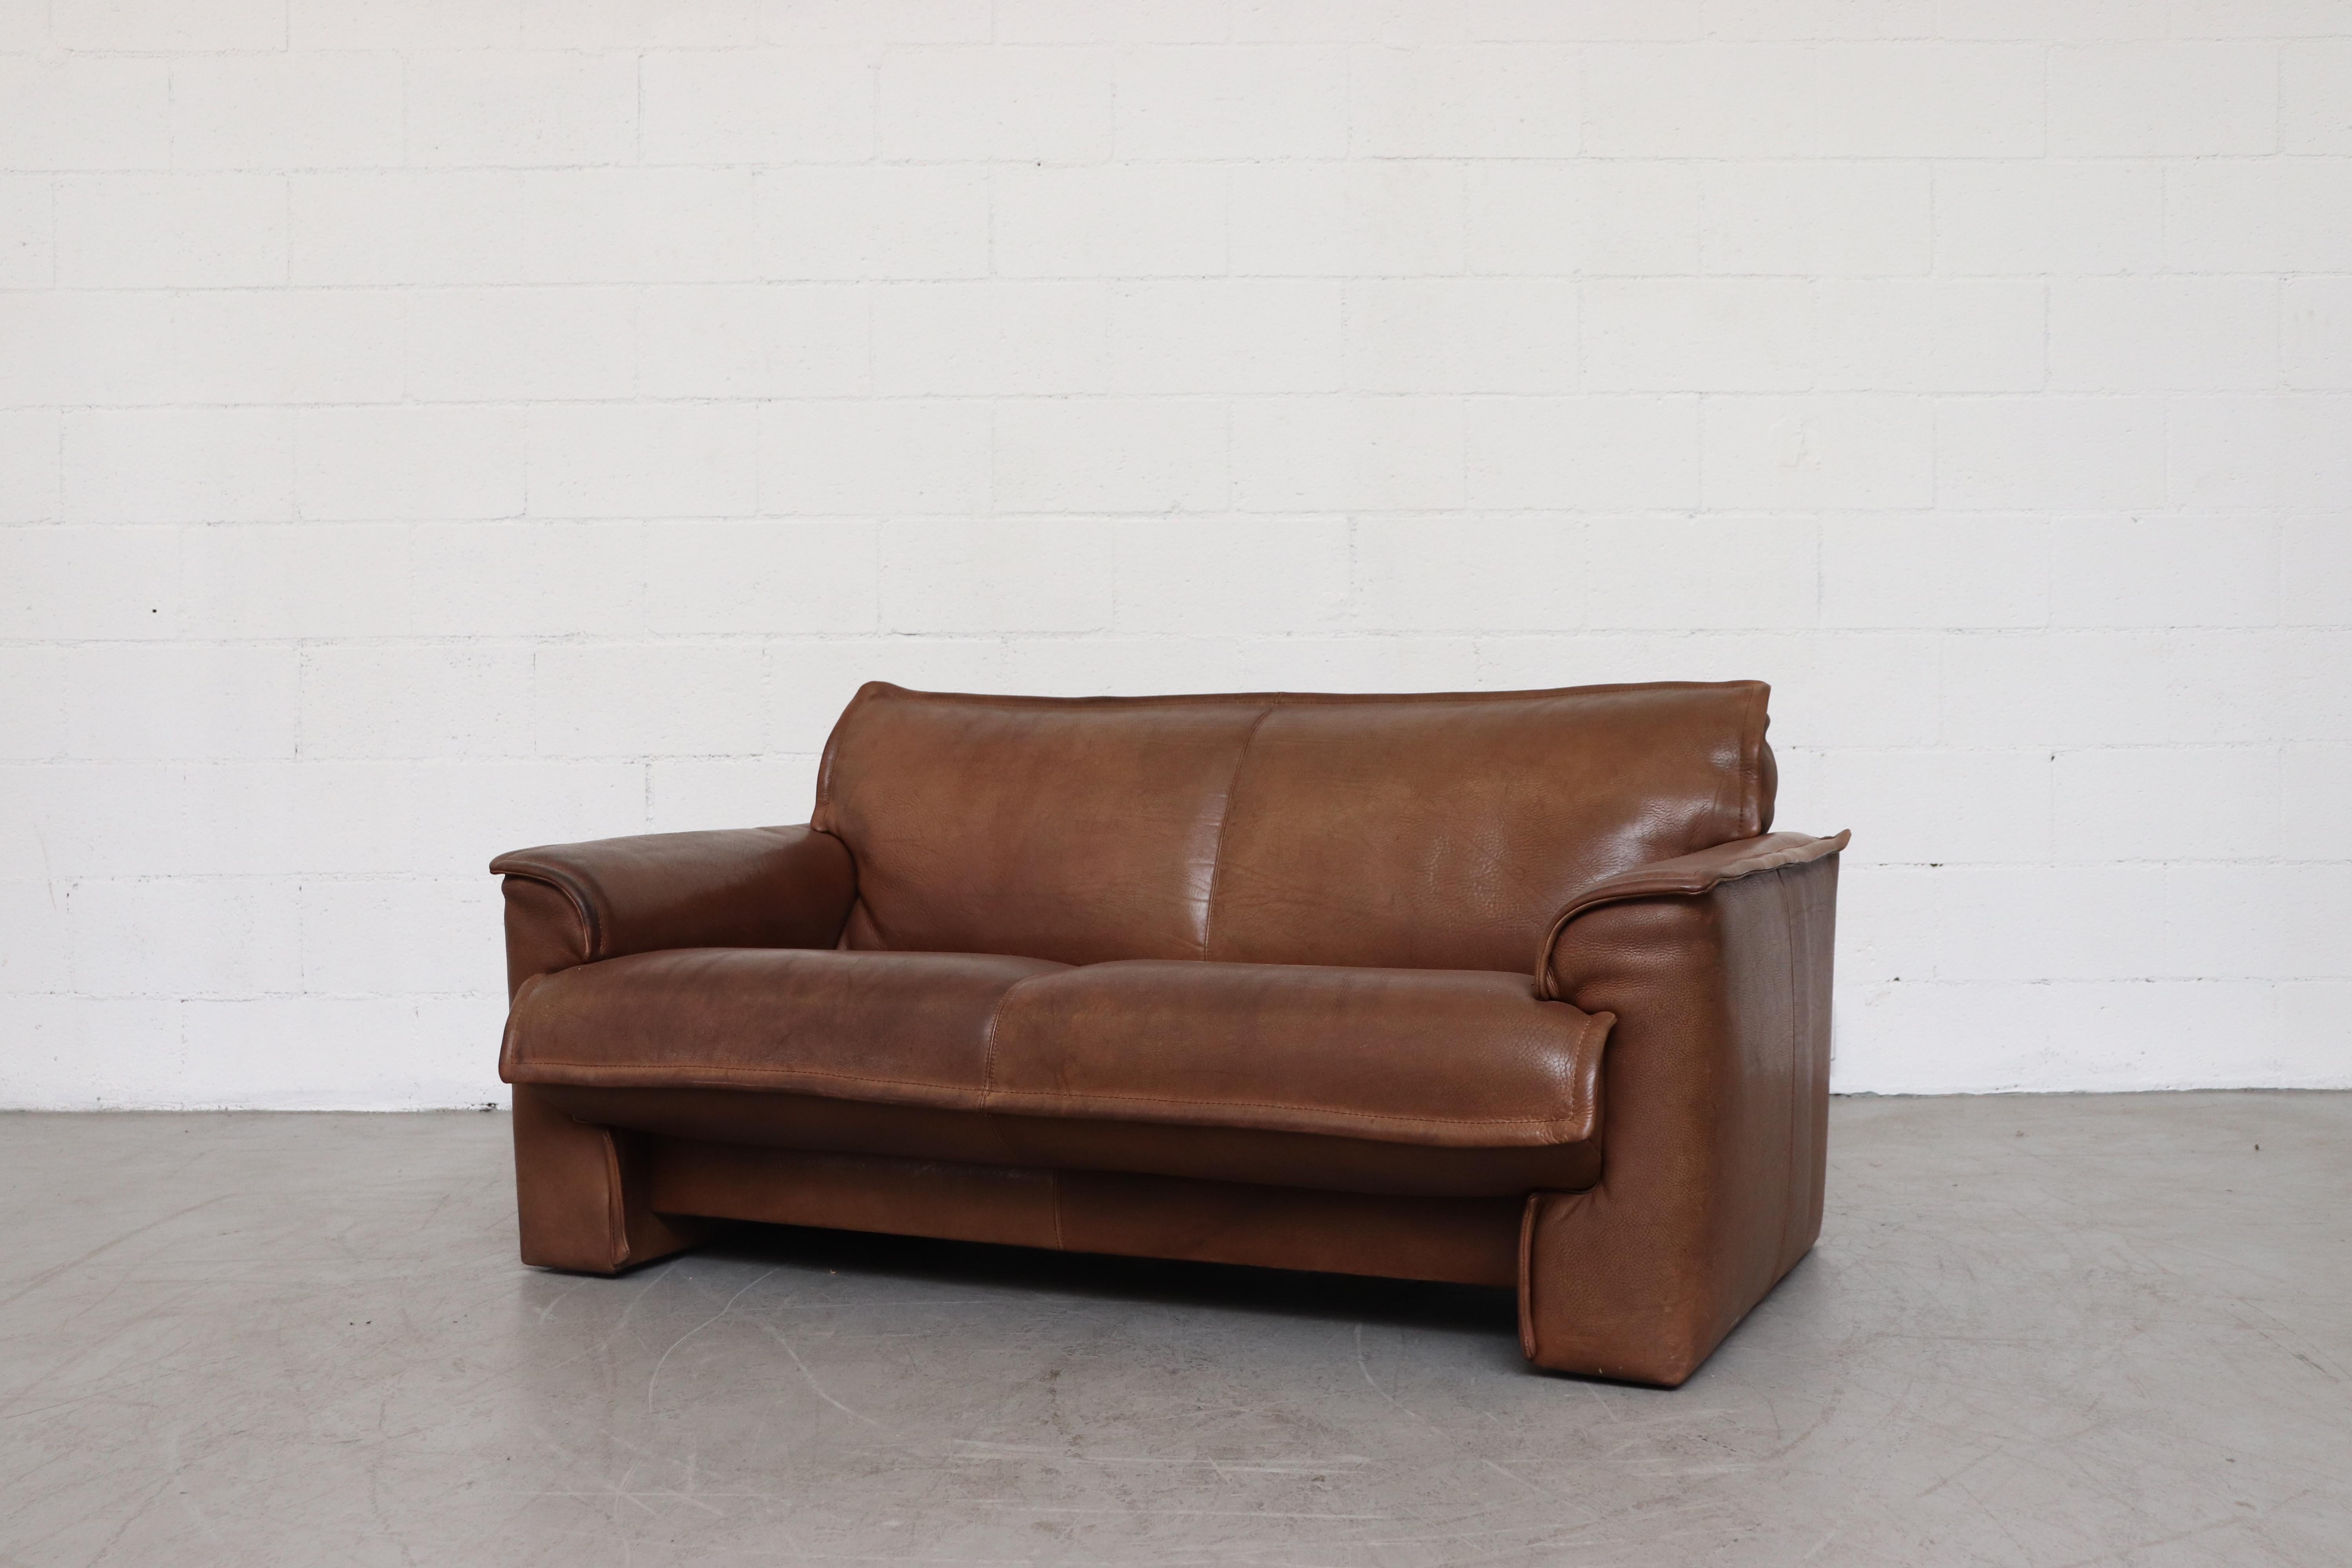 Leolux buffalo leather loveseat with heavy patina. In original condition with visible signs of wear. Wear is consistent with its age and usage. Several others available in varying patinas and listed separately (LU922412844482, LU922415582222)